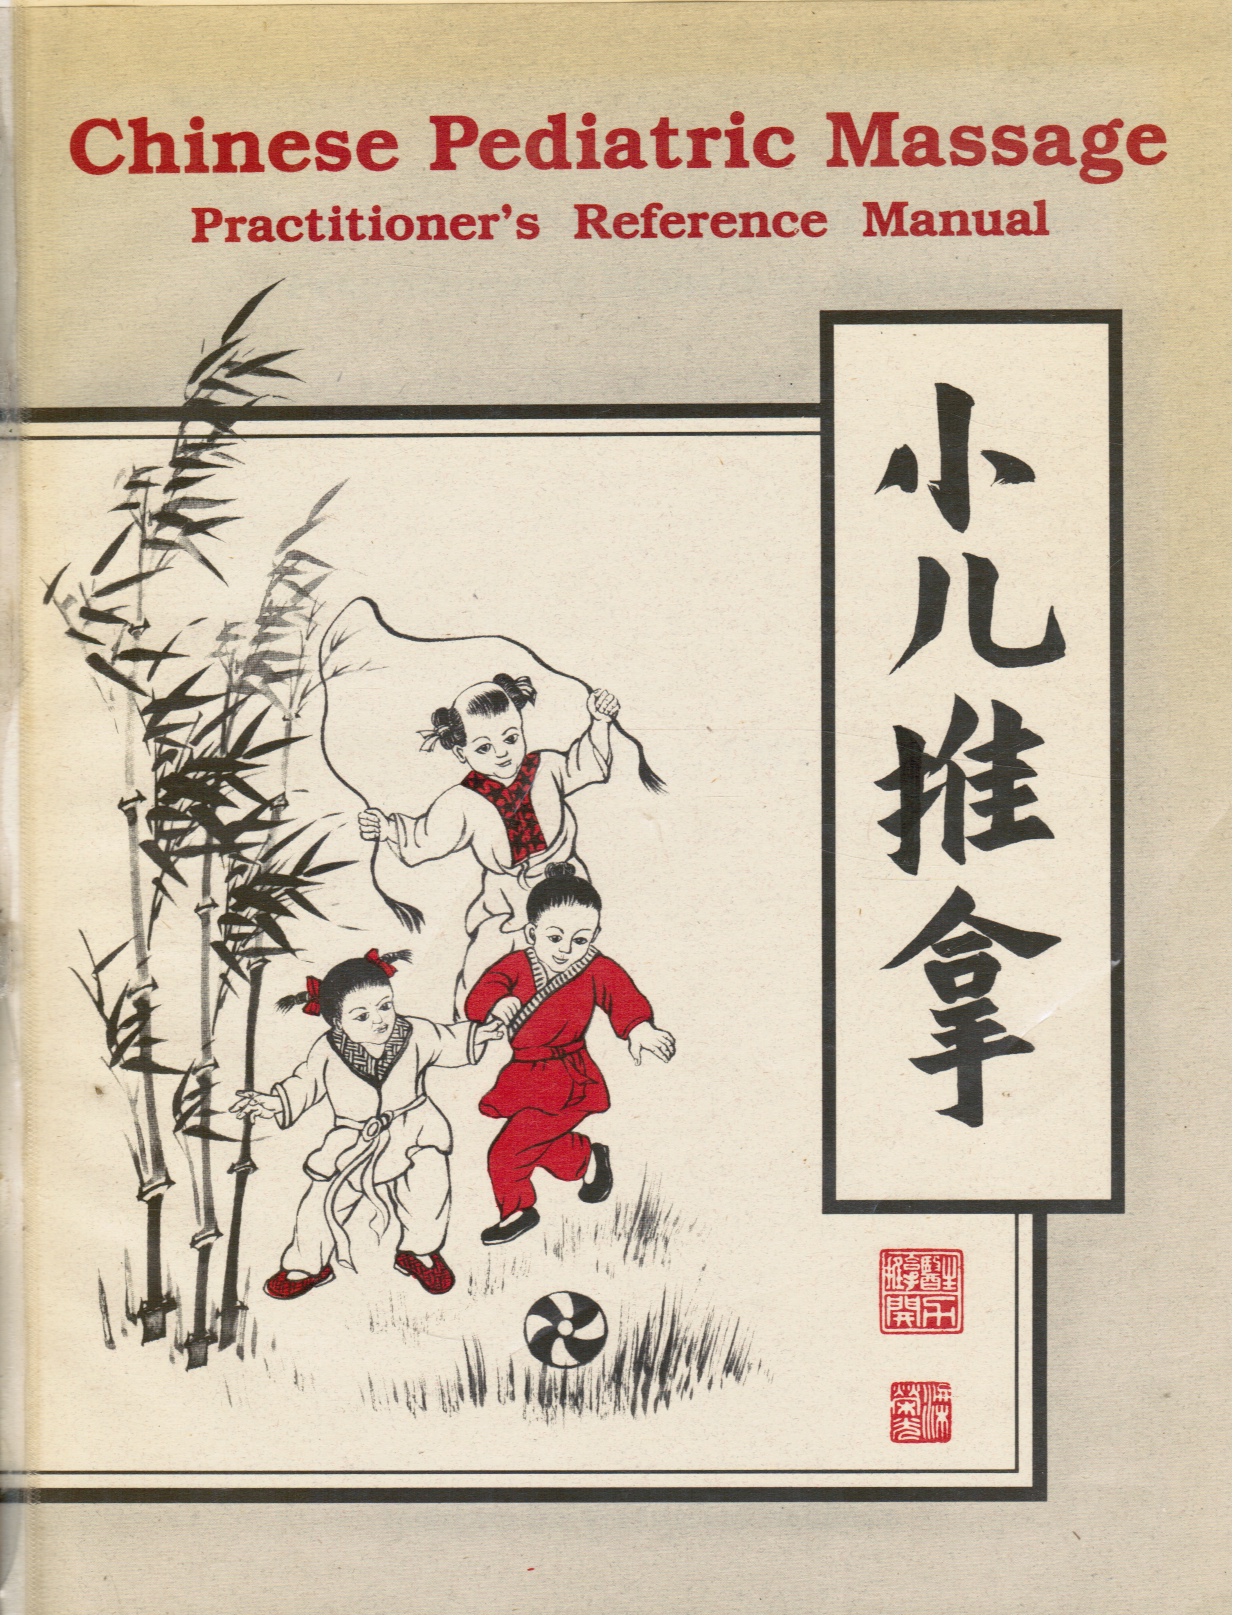 CLINE, KYLE - Chinese Pediatric Massage: Practitioner's Reference Manual